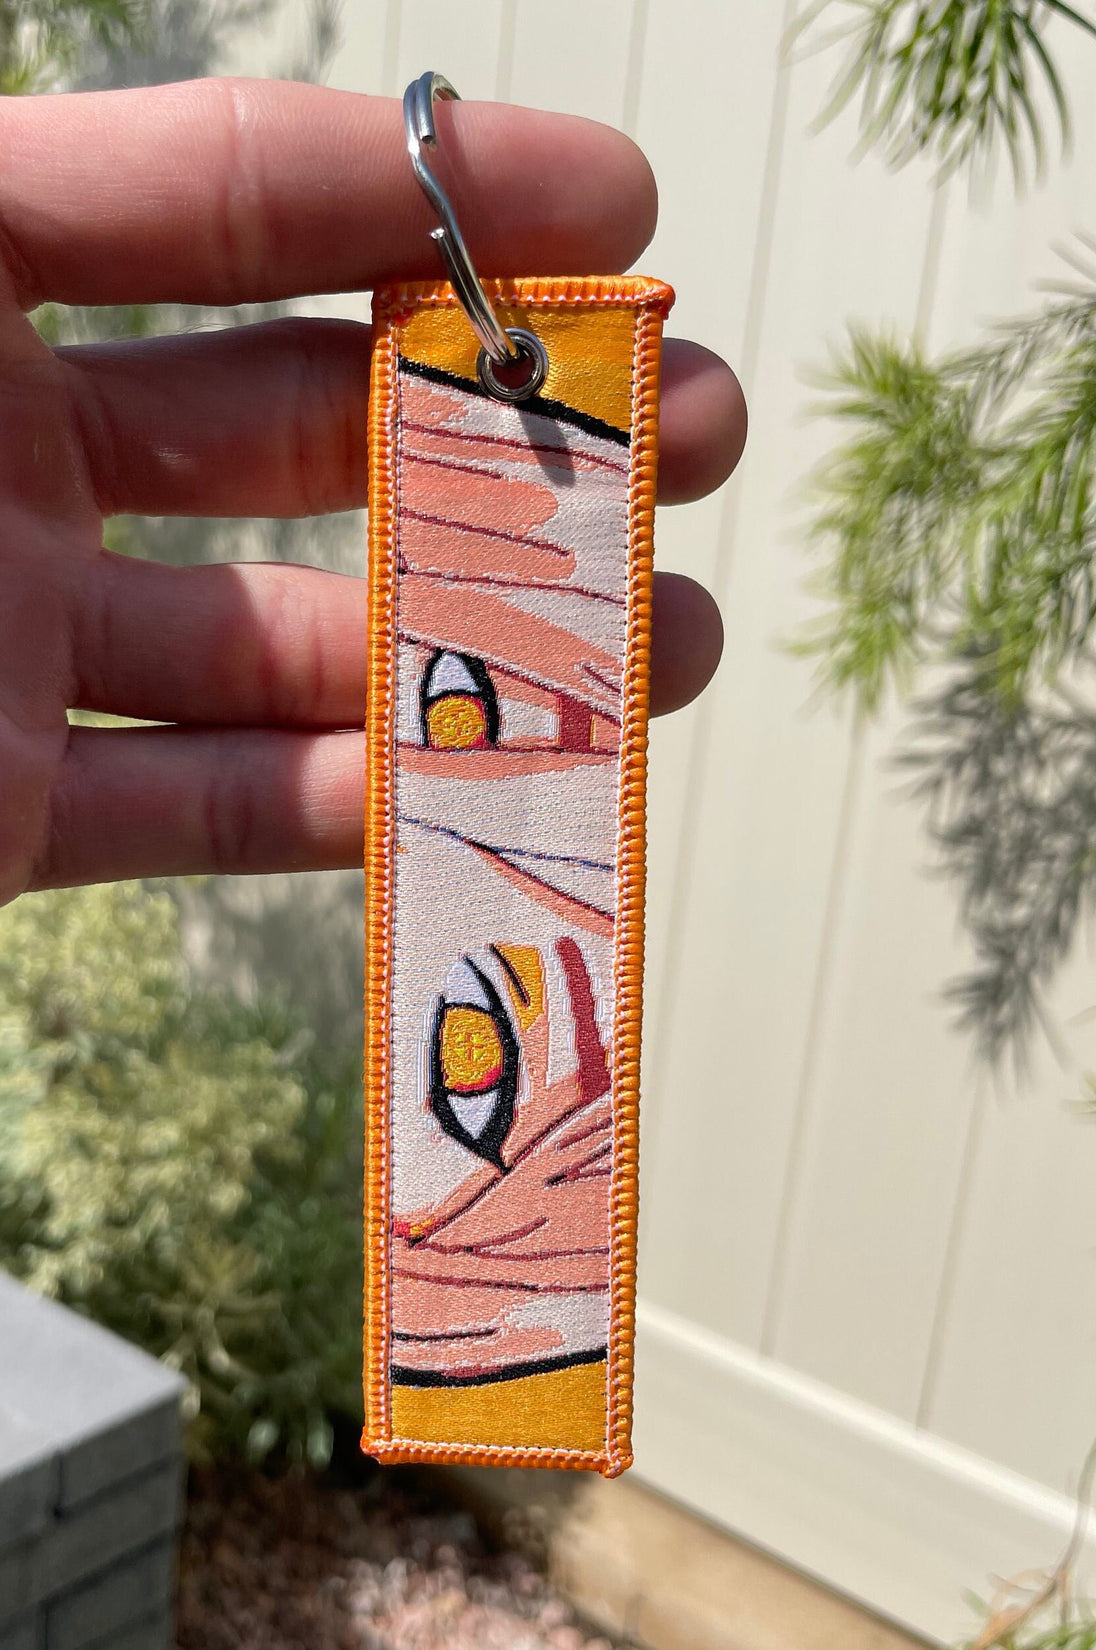 Embroidered Anime Jet Tag / Key Tag